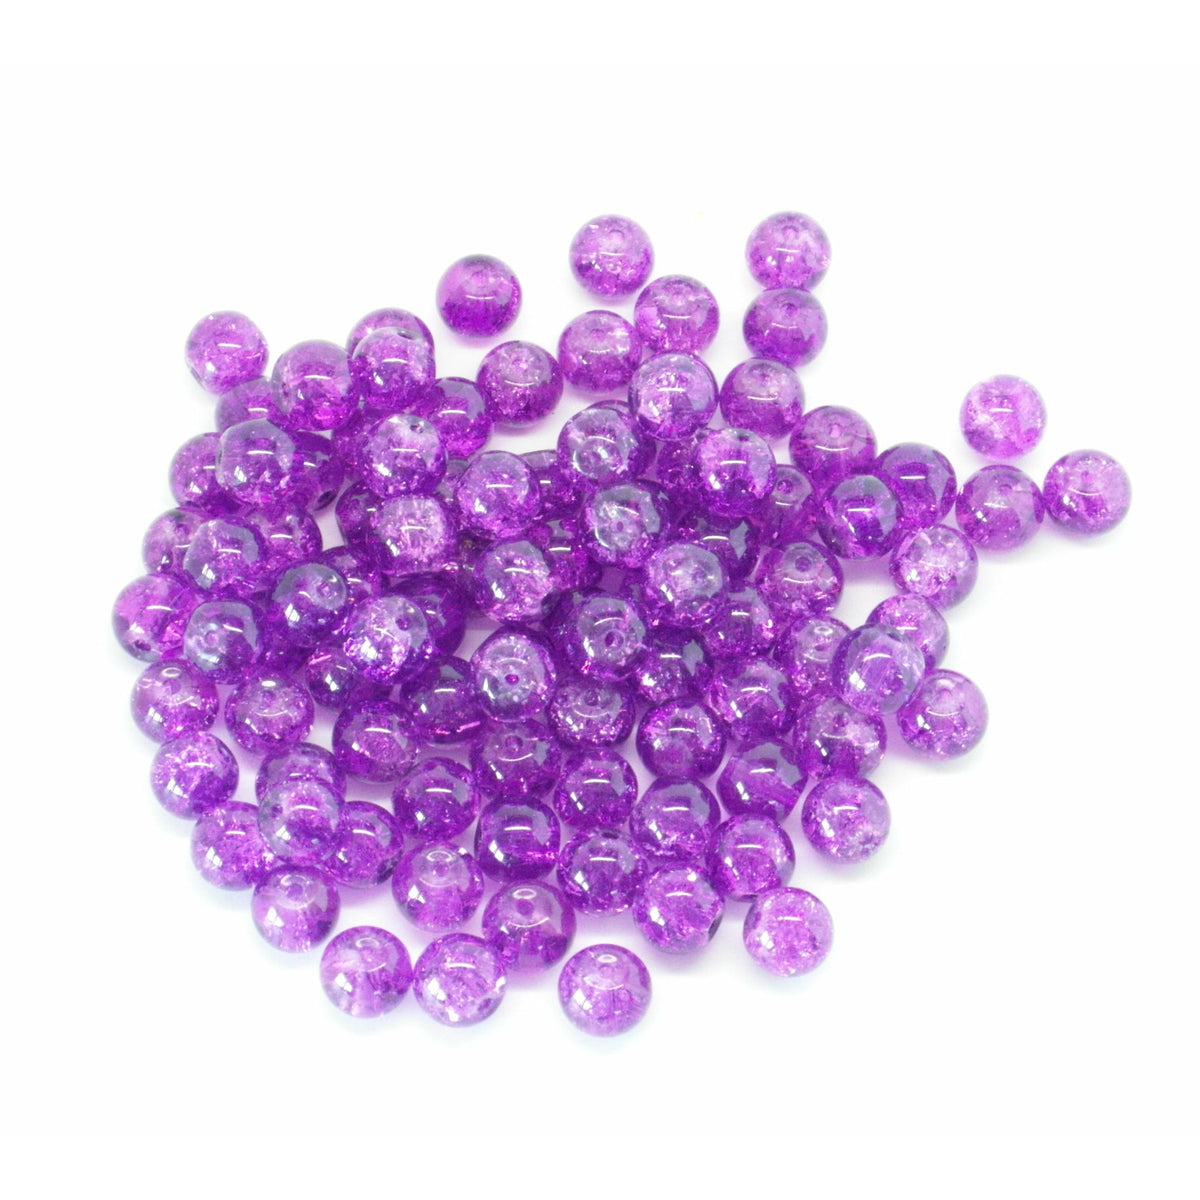 10x Crackle Glass Beads, 8mm Marbles Cracked Glass Beads, Purple Crackled  Glass Beads, Spacer Beads, Beading Supplies B134 